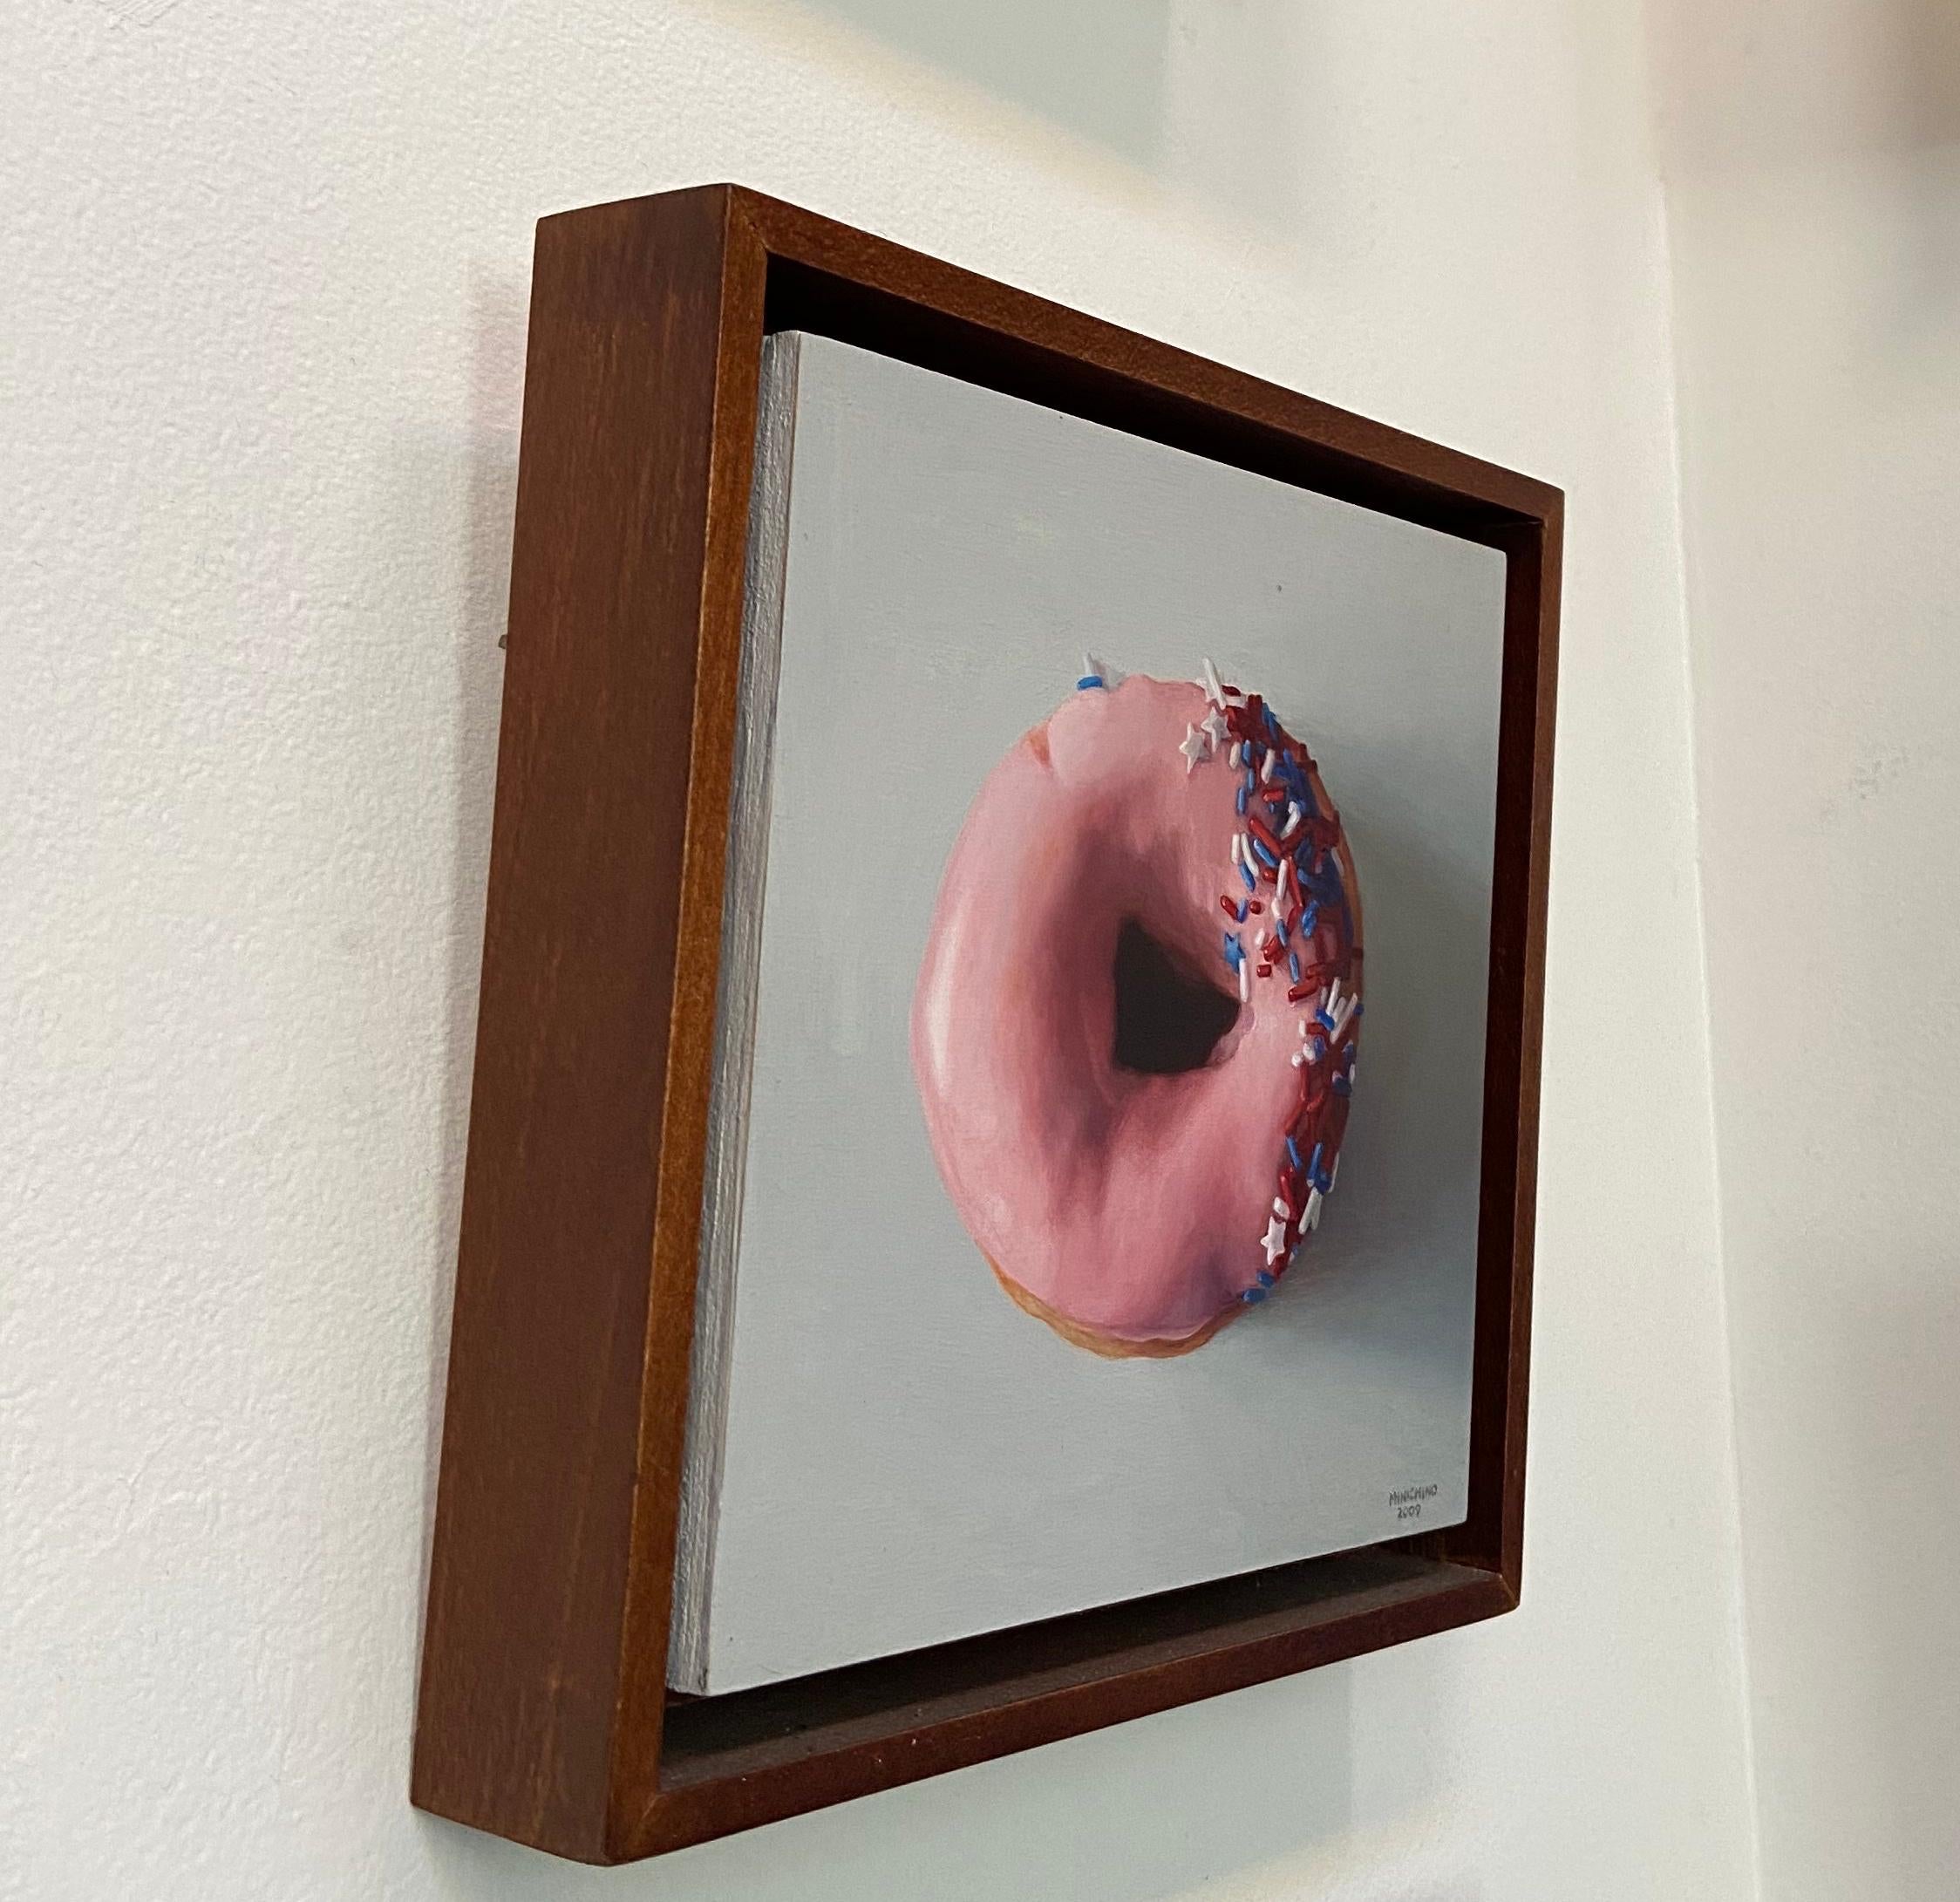 Sprinkled Donut - Painting by Gina Minichino